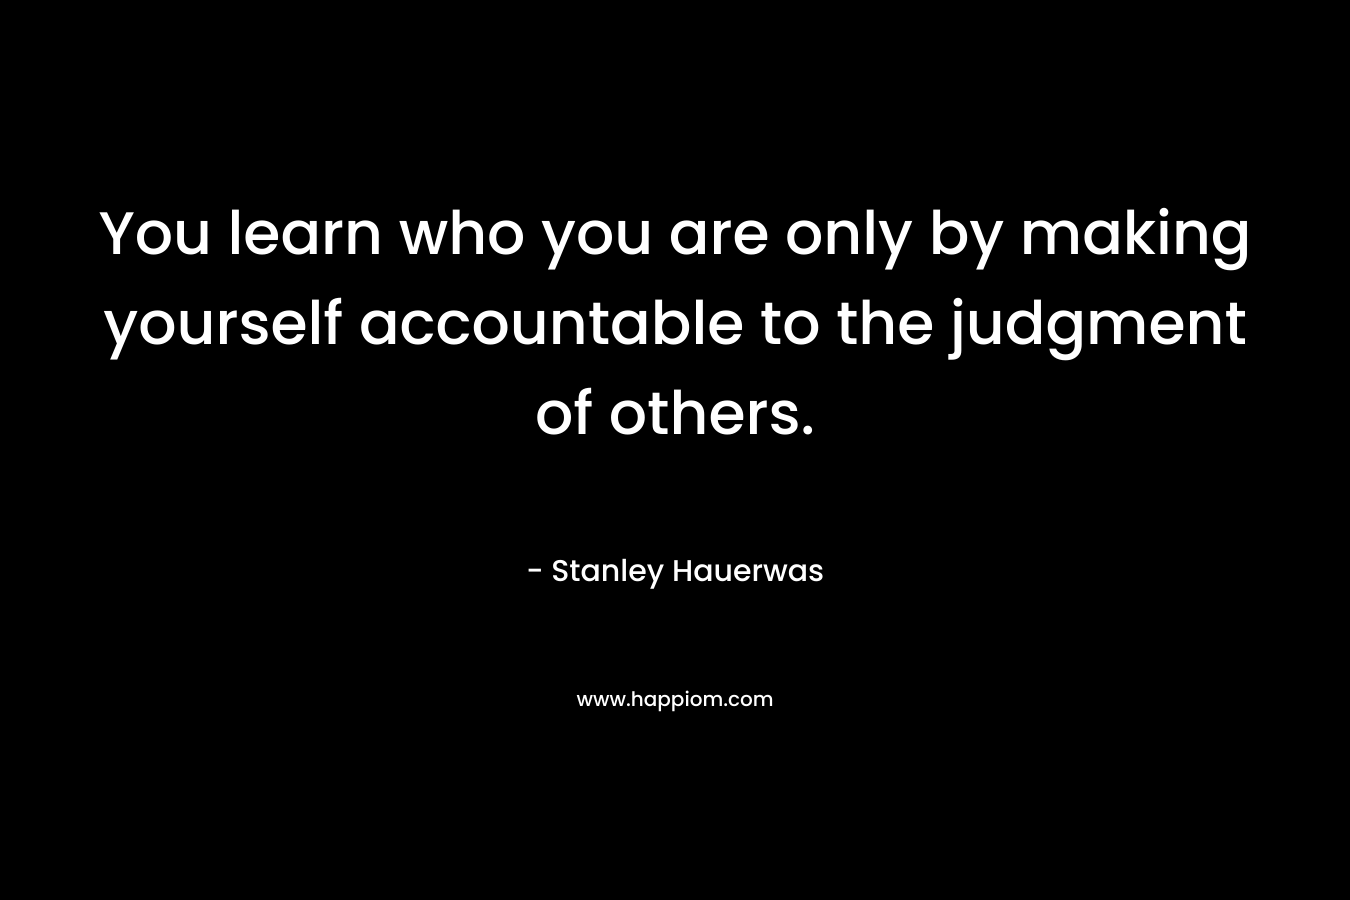 You learn who you are only by making yourself accountable to the judgment of others. – Stanley Hauerwas